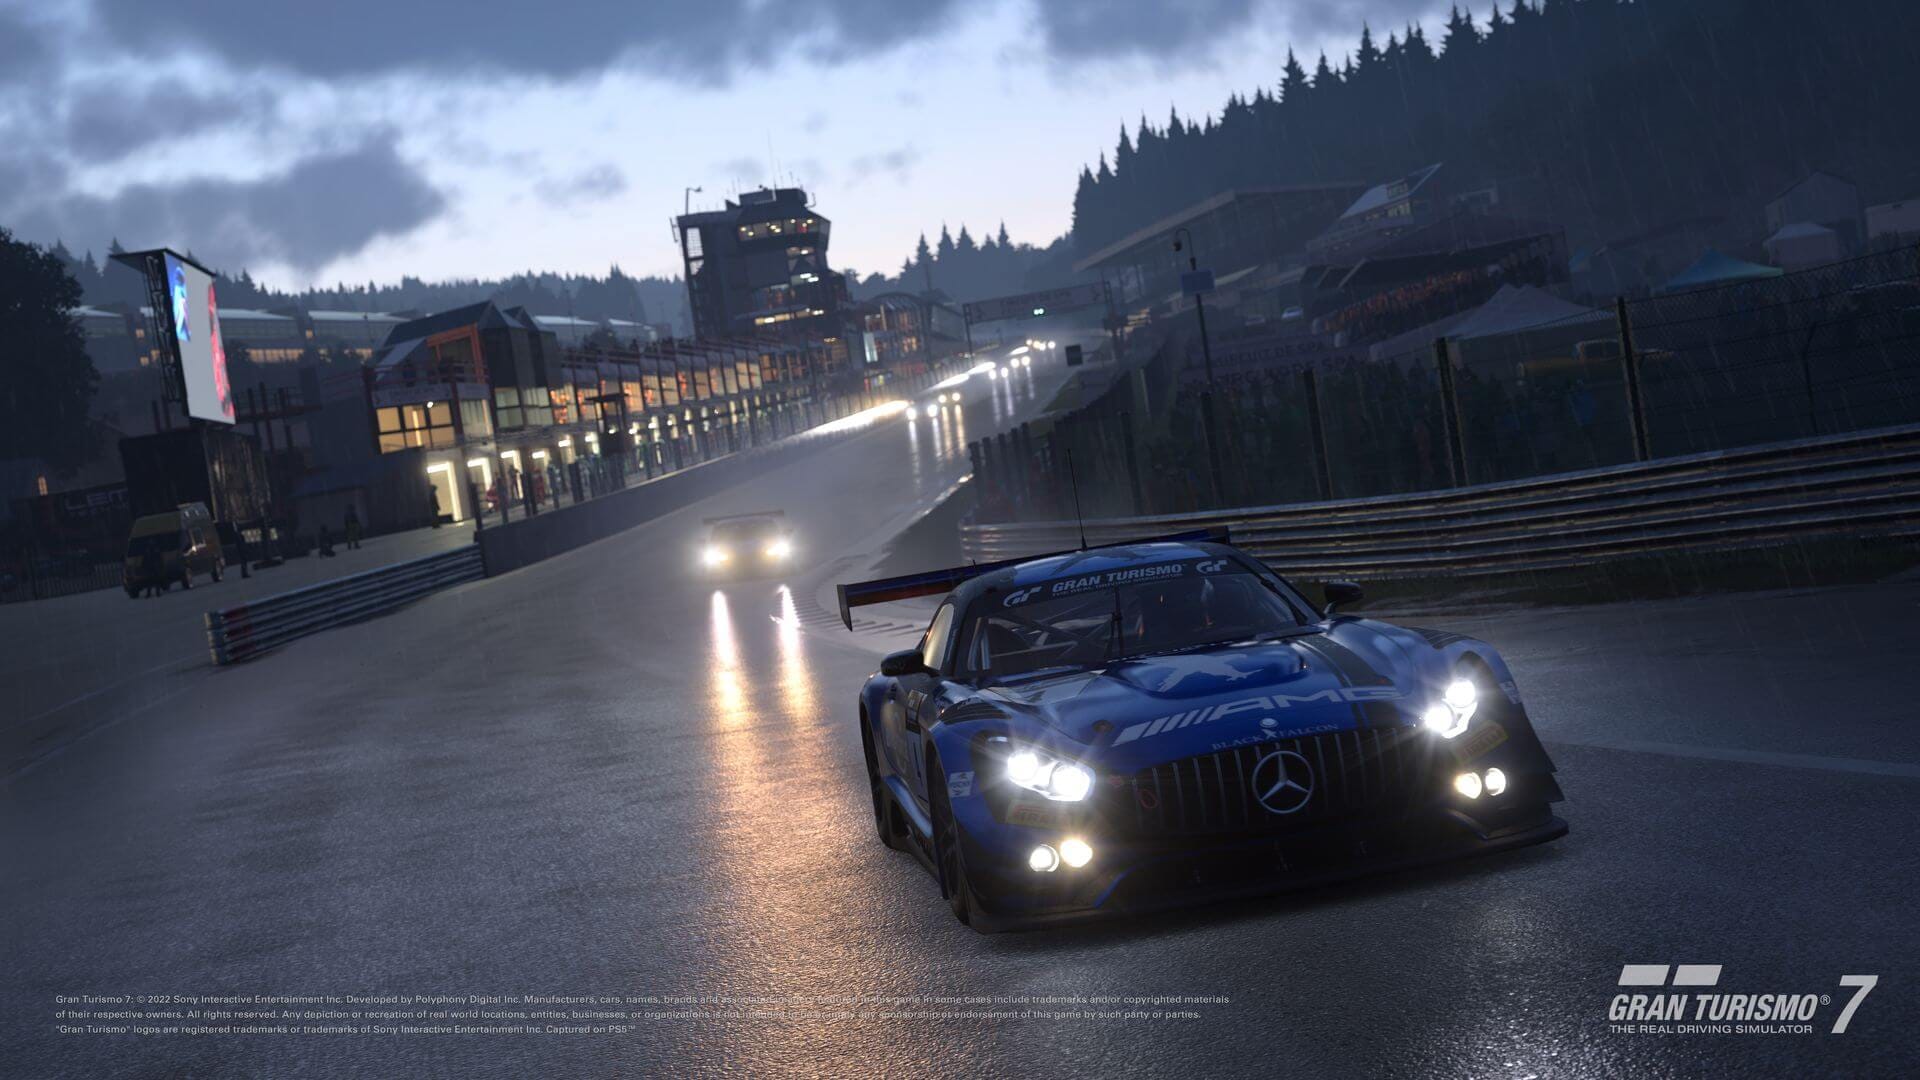 First Big Gran Turismo 7 Update Brings New Cars And More | TechRaptor